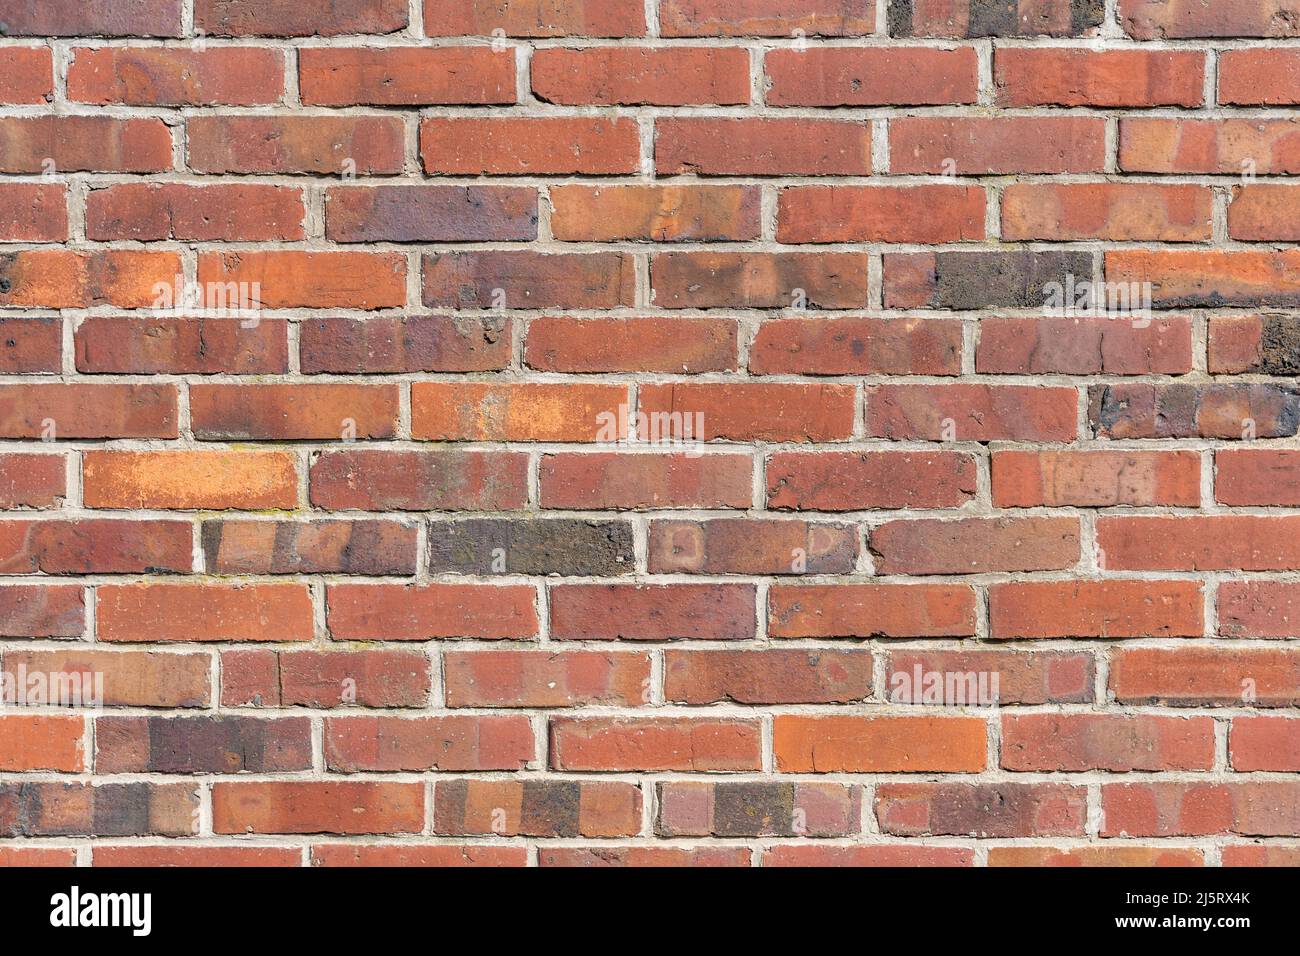 Red brick wall background texture. Multiple rows of weathered stone blocks. Full frame backdrop of a building facade. Rough exterior of a house. Stock Photo